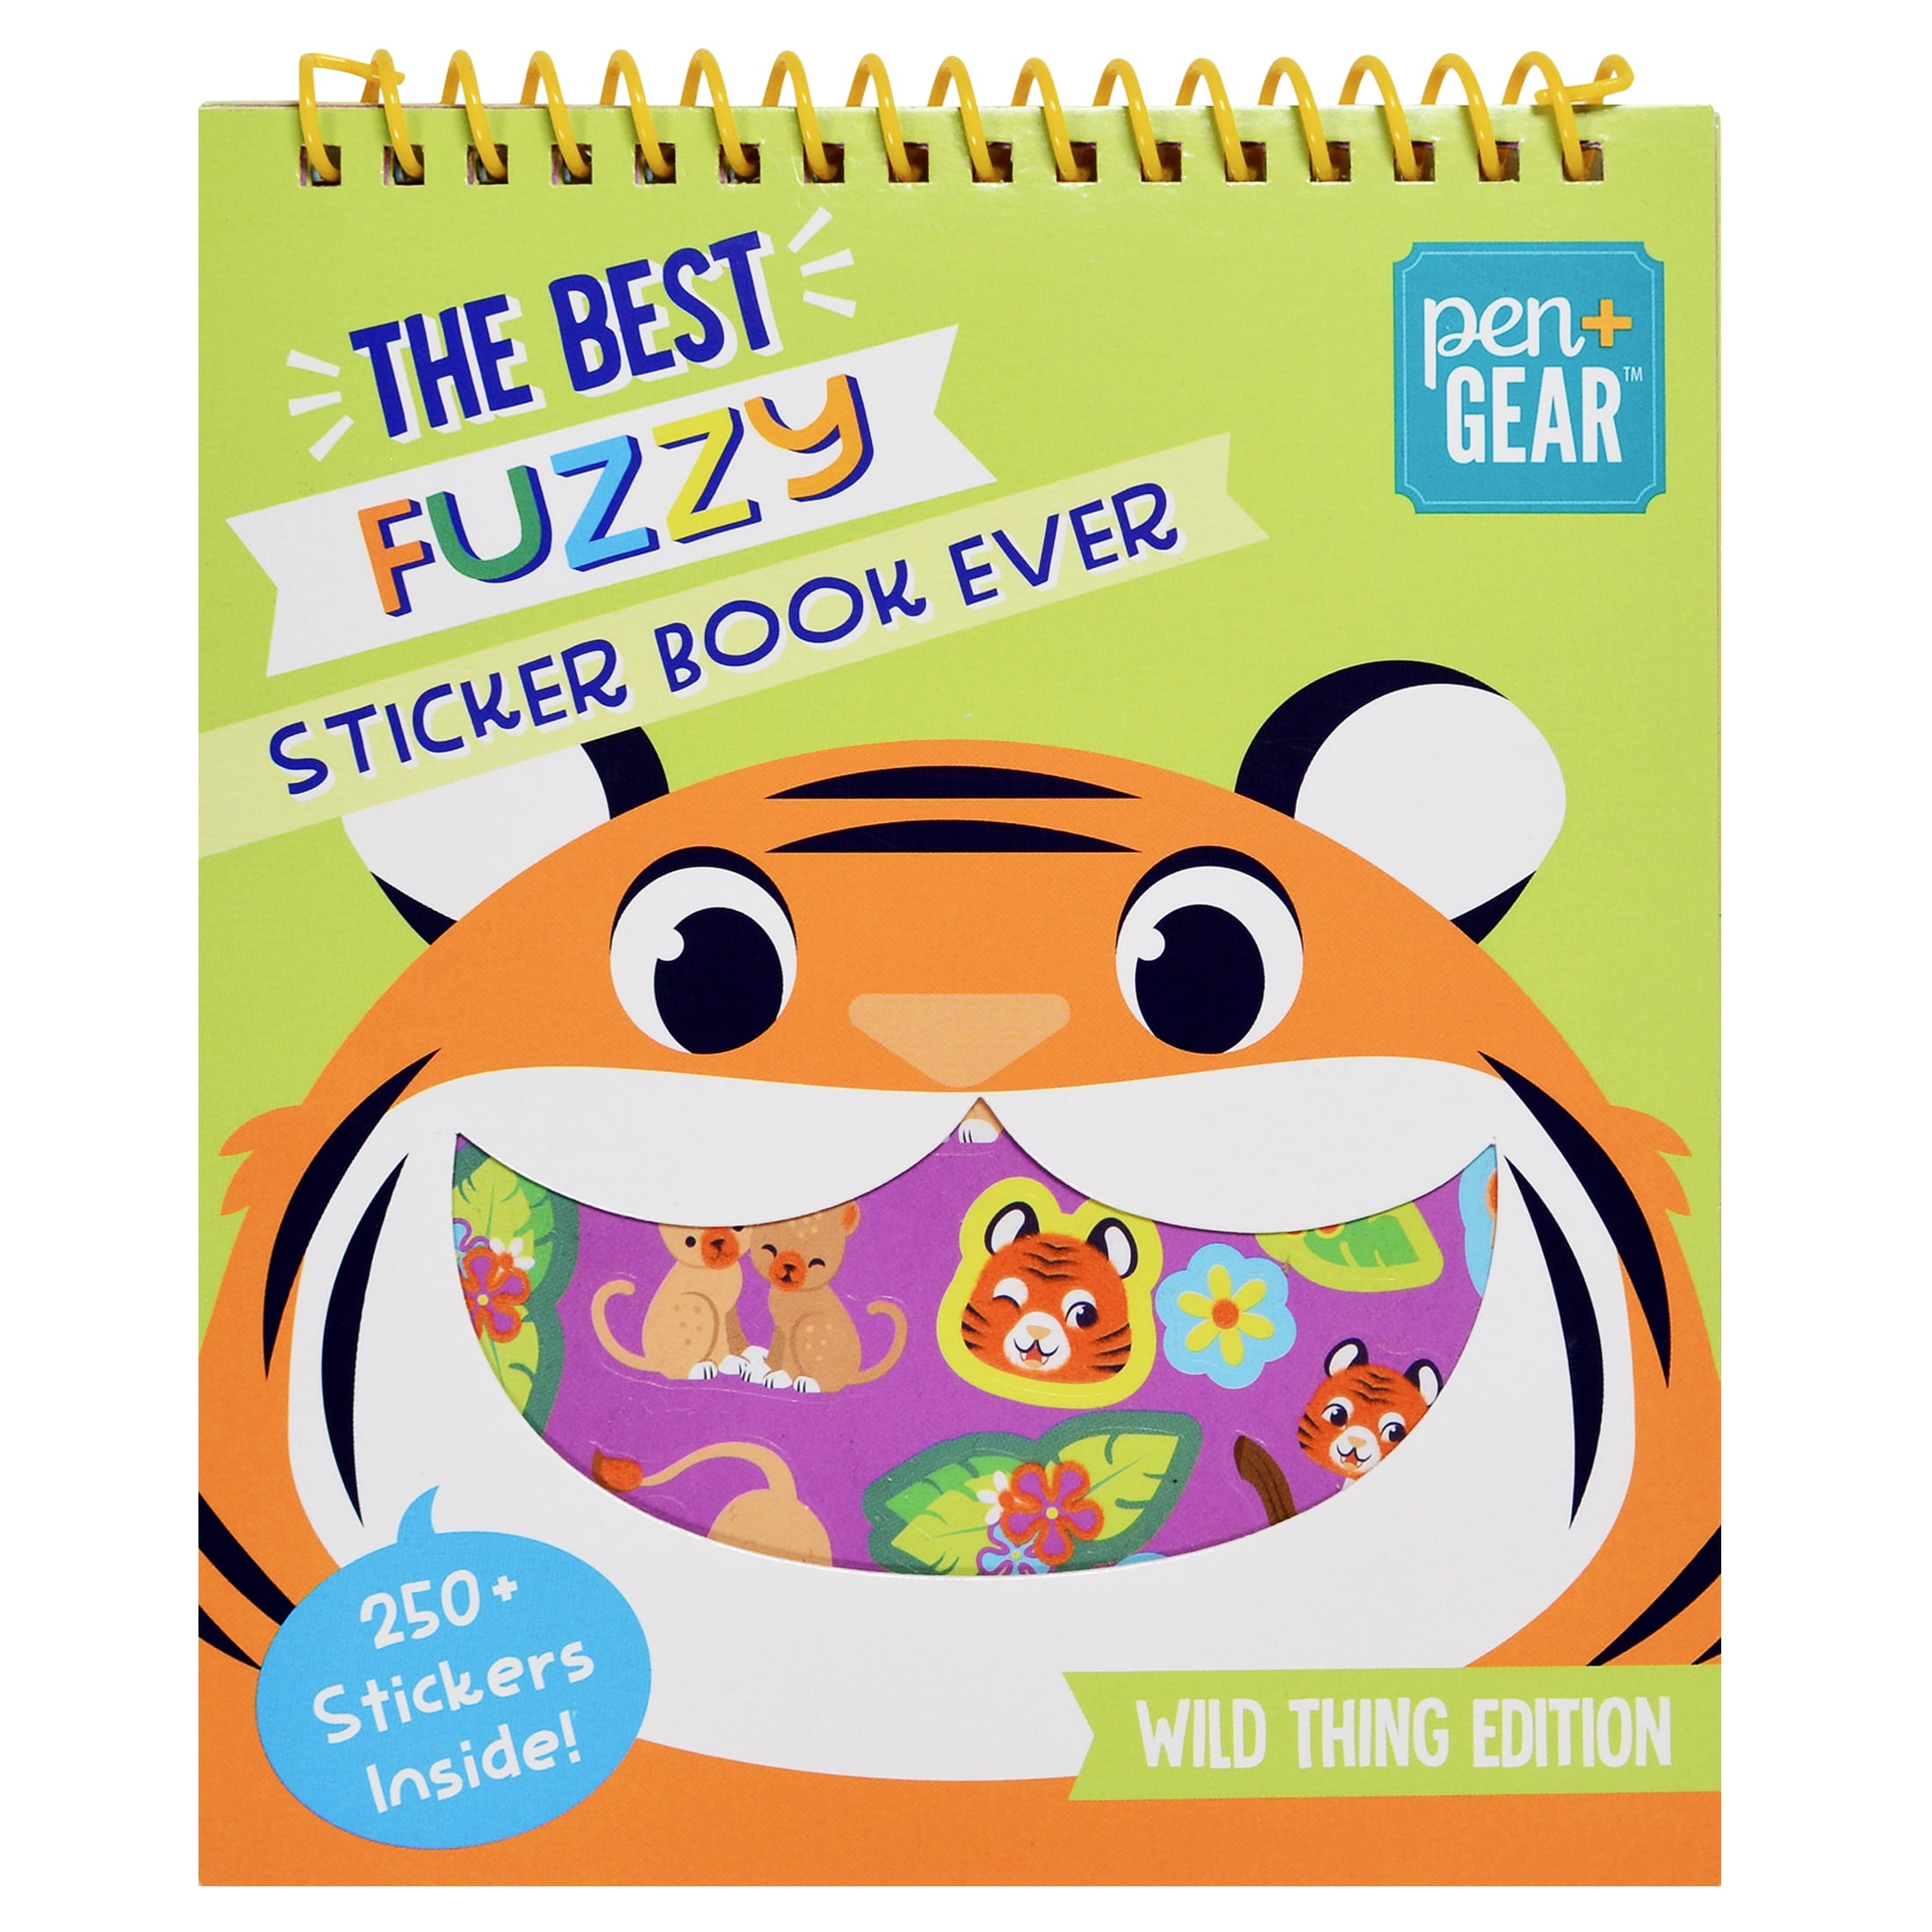  Reusable Sticker Book for Learning, 3 Sets Dinosaur Stickers  Ocean Animals and Vehicles Theme Activity Sticker Books for Kids 2-4 Girls  Boys Travel Sticker Books for Toddlers Educational Toys : Everything Else